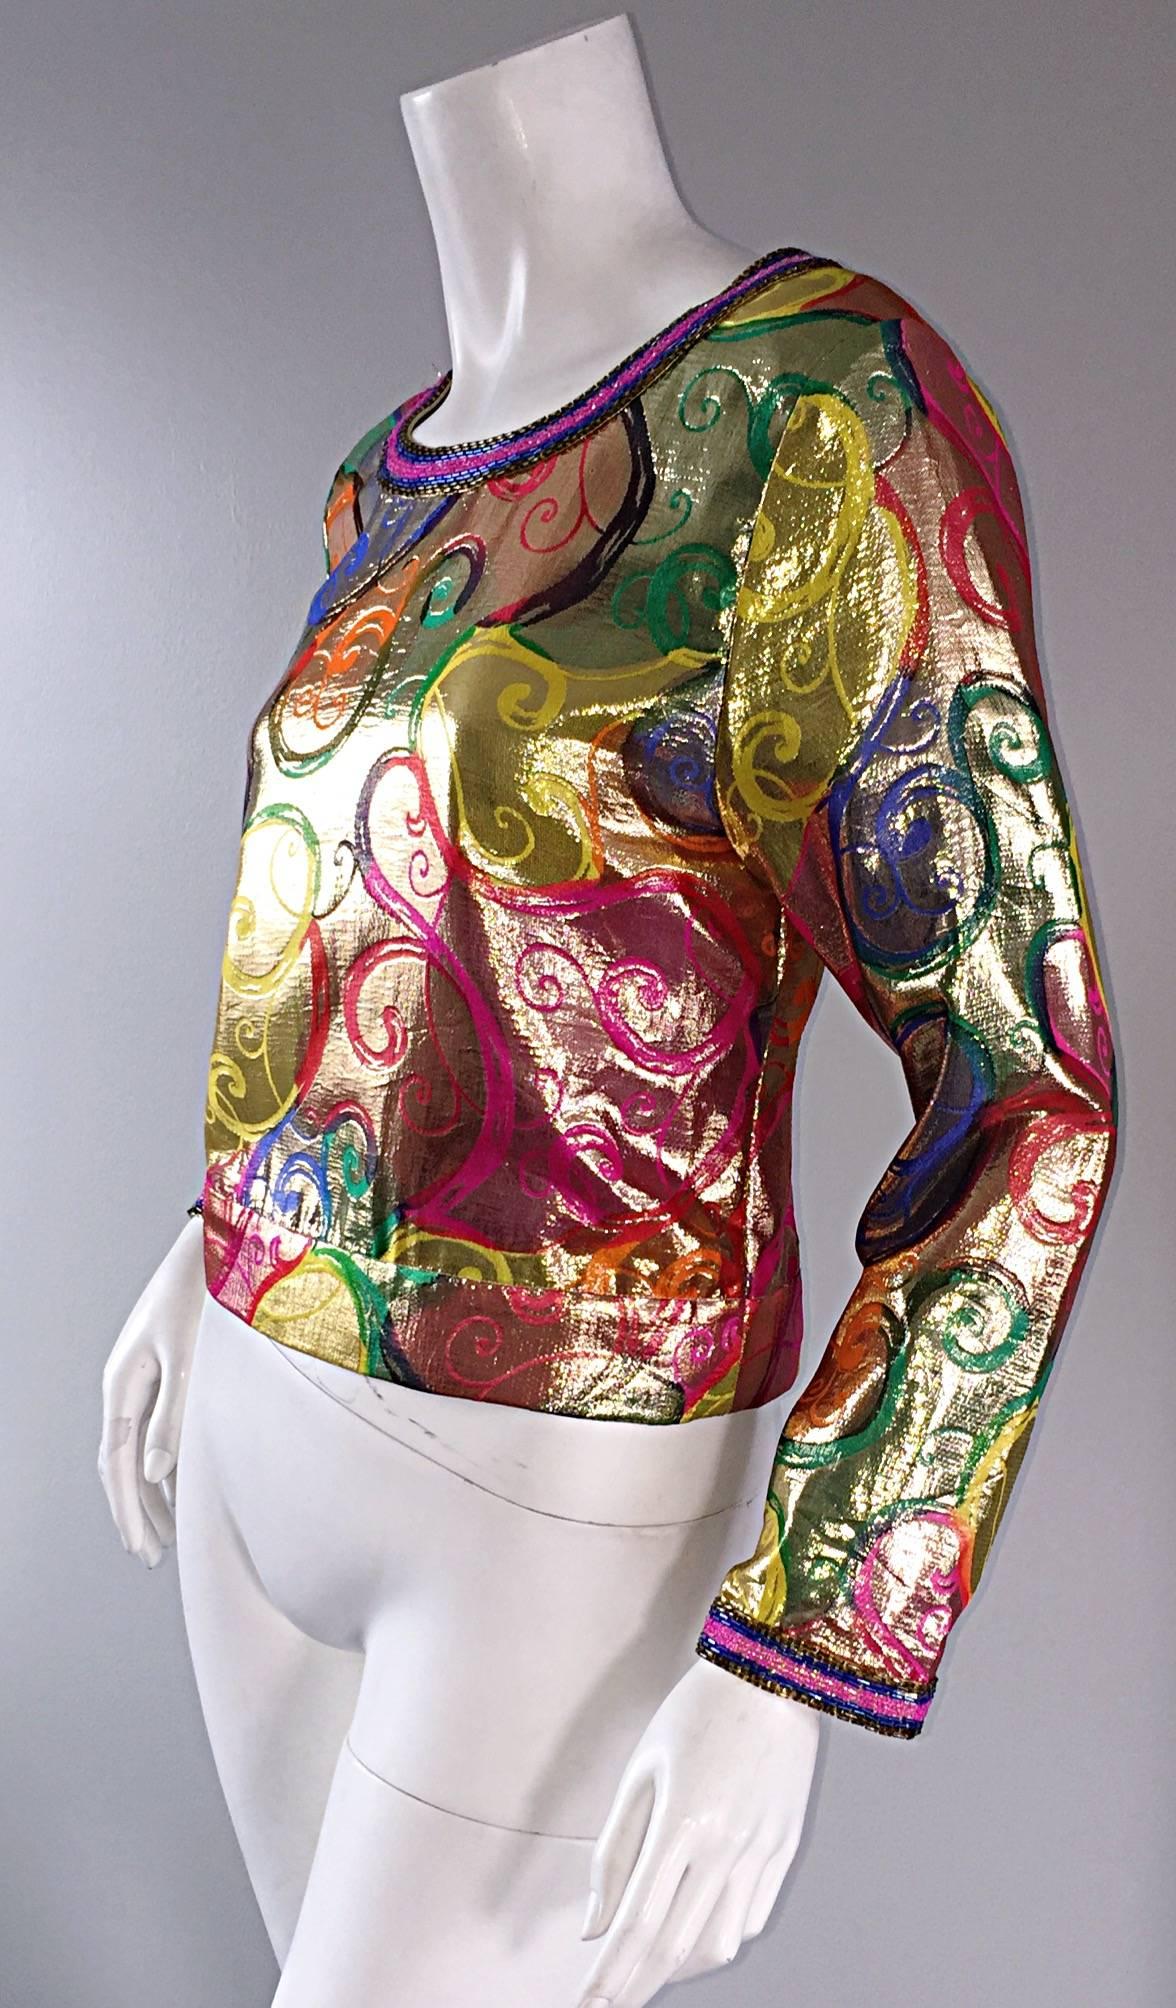 Amazing vintage Diane Freis / Fres silk metallic blouse! Features swirl prints throughout, with beaded collar, and cuffs! Brand new, with original tags. Vibrant metallic colors. Looks great with jeans, a skirt or shorts. Approximately Size